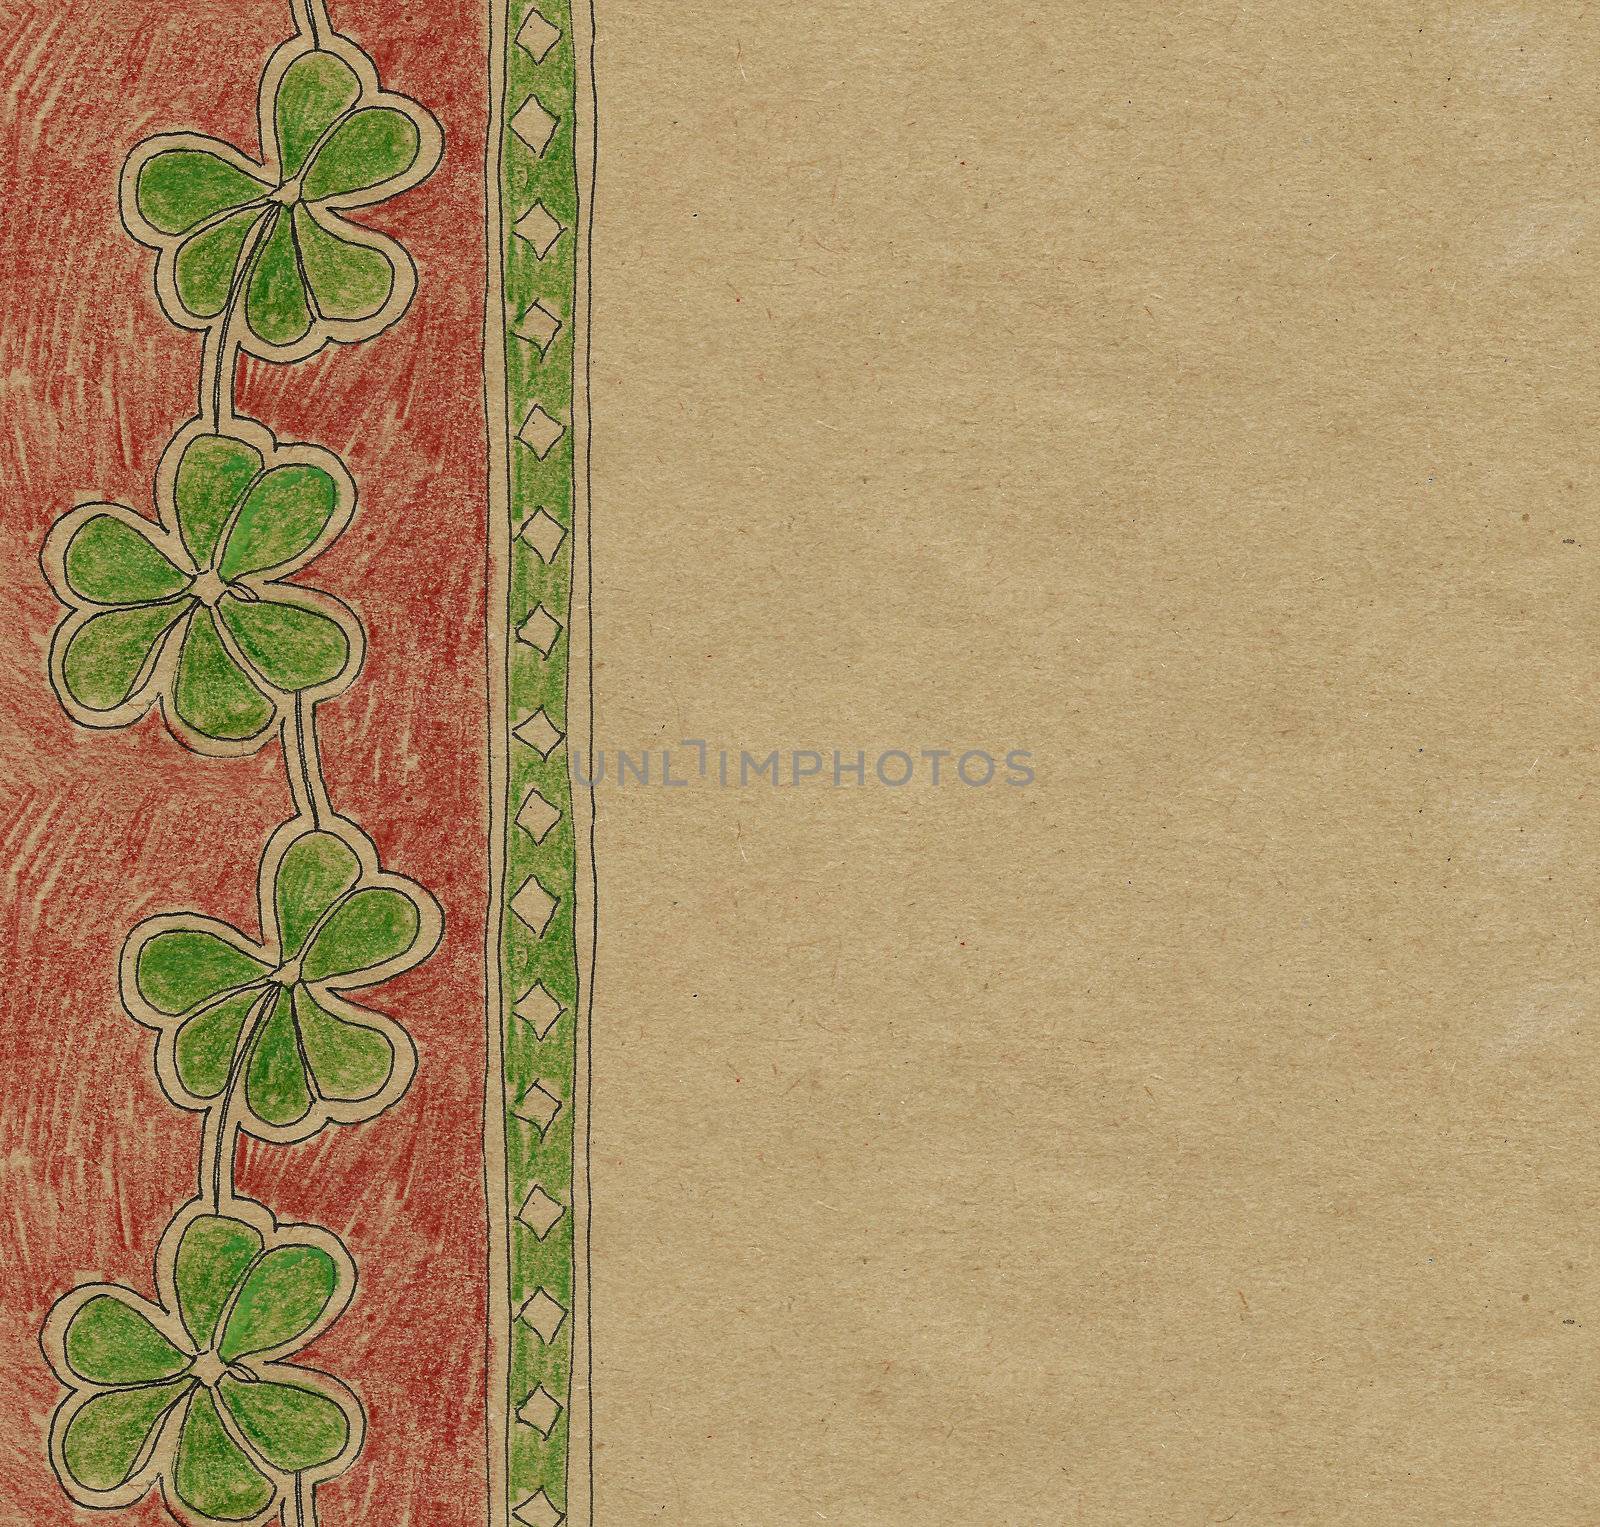 three leaves clover pattern by nathings